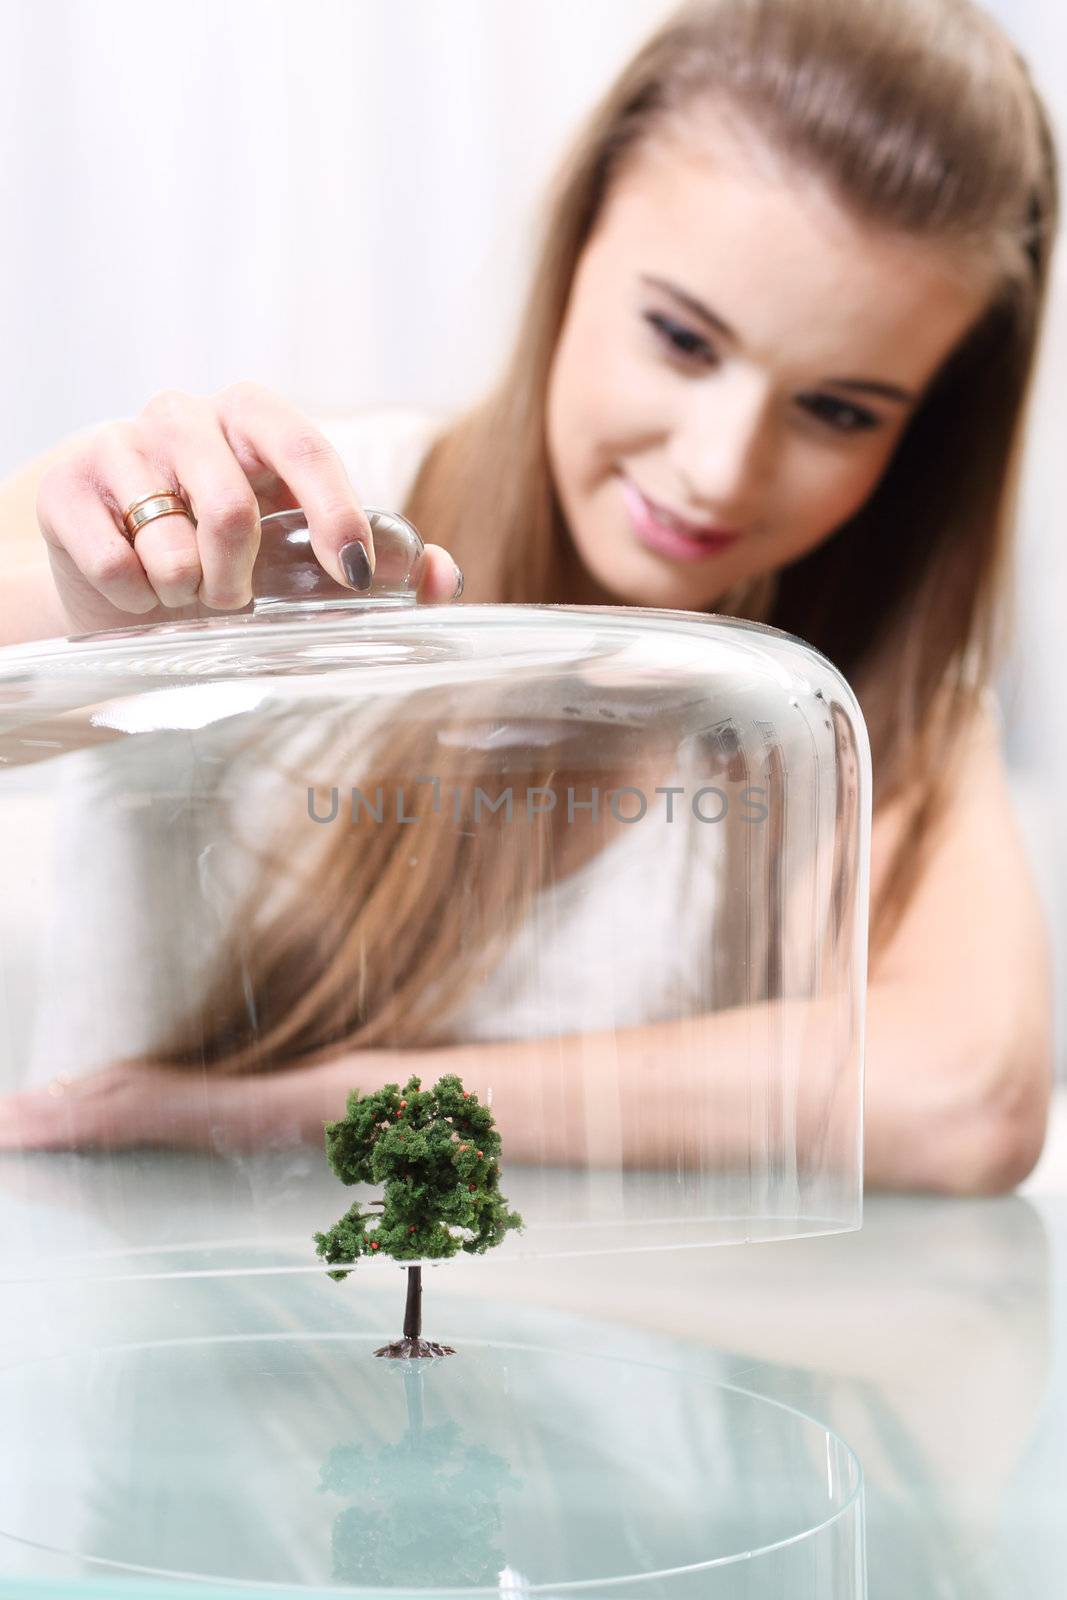 Girl covers a small artificial tree on the table, Ecological concept by robert_przybysz